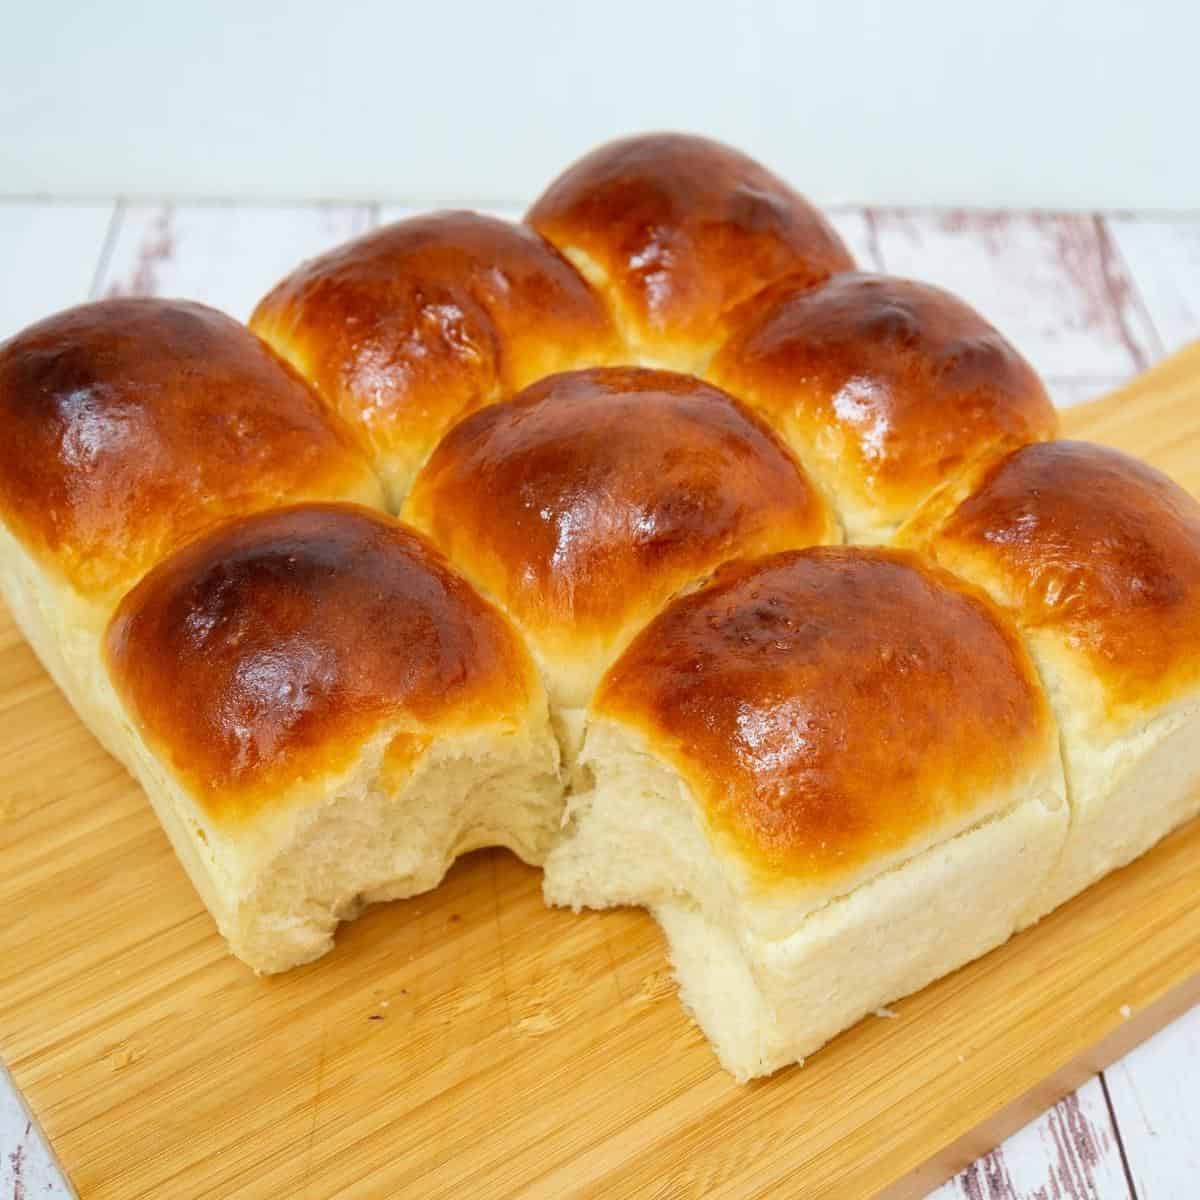 A wooden board with dinner rolls.